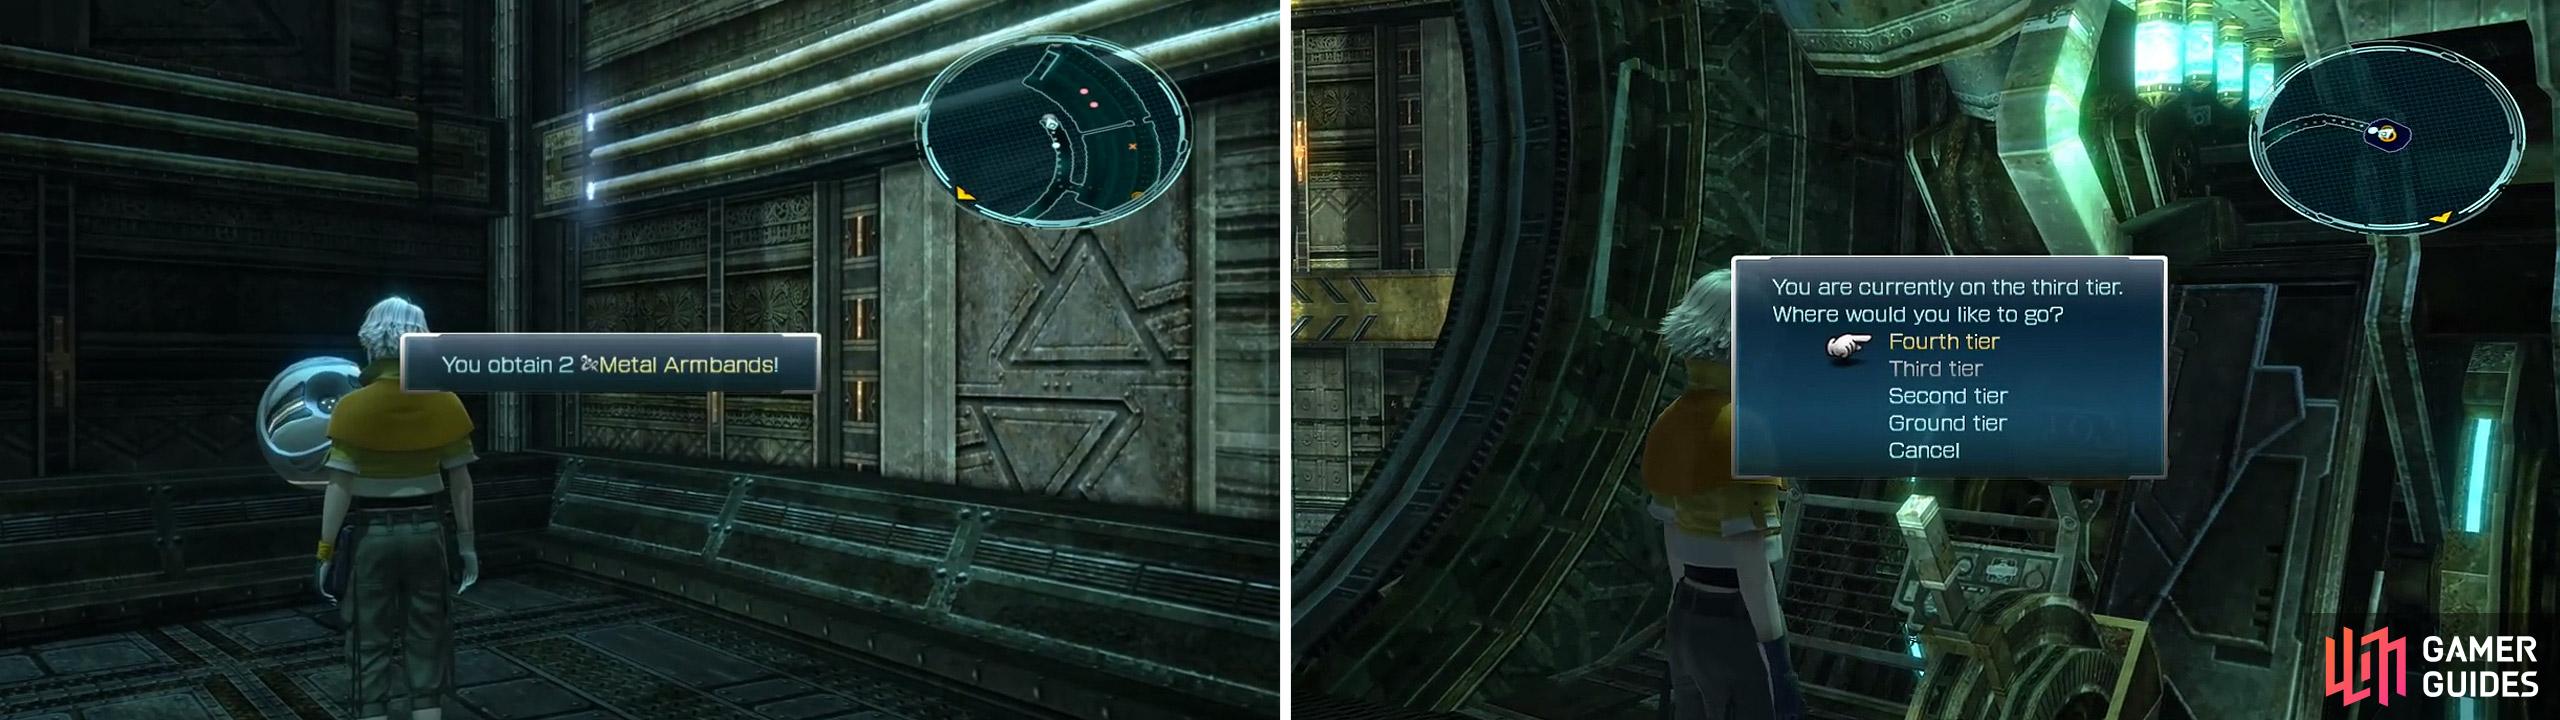 2x Metal Armband (left) location and after, call the elevator and take it to 4th floor (right).